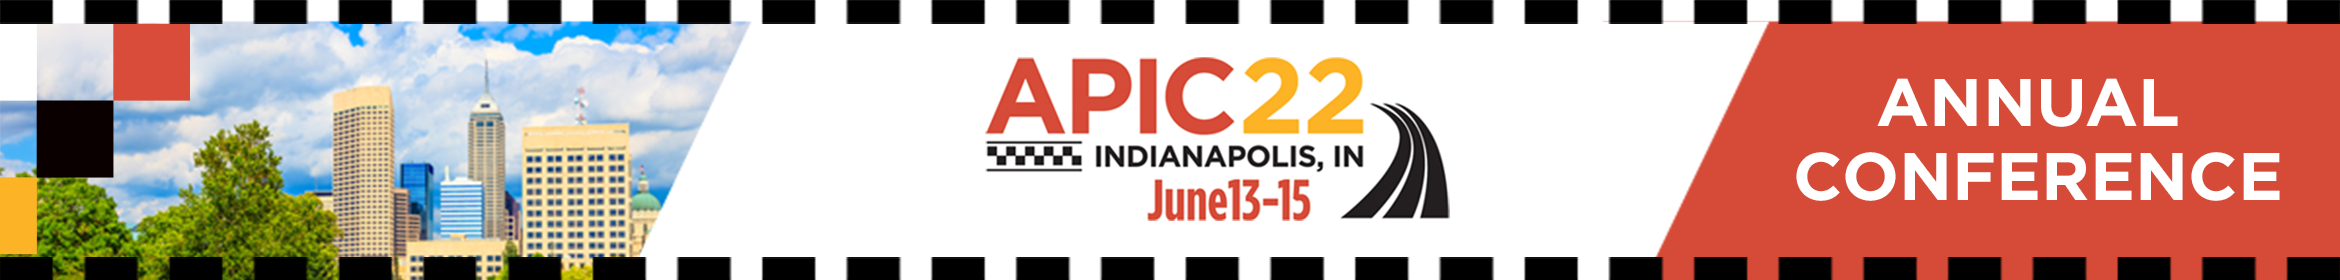 APIC 2022 Annual Conference Main banner